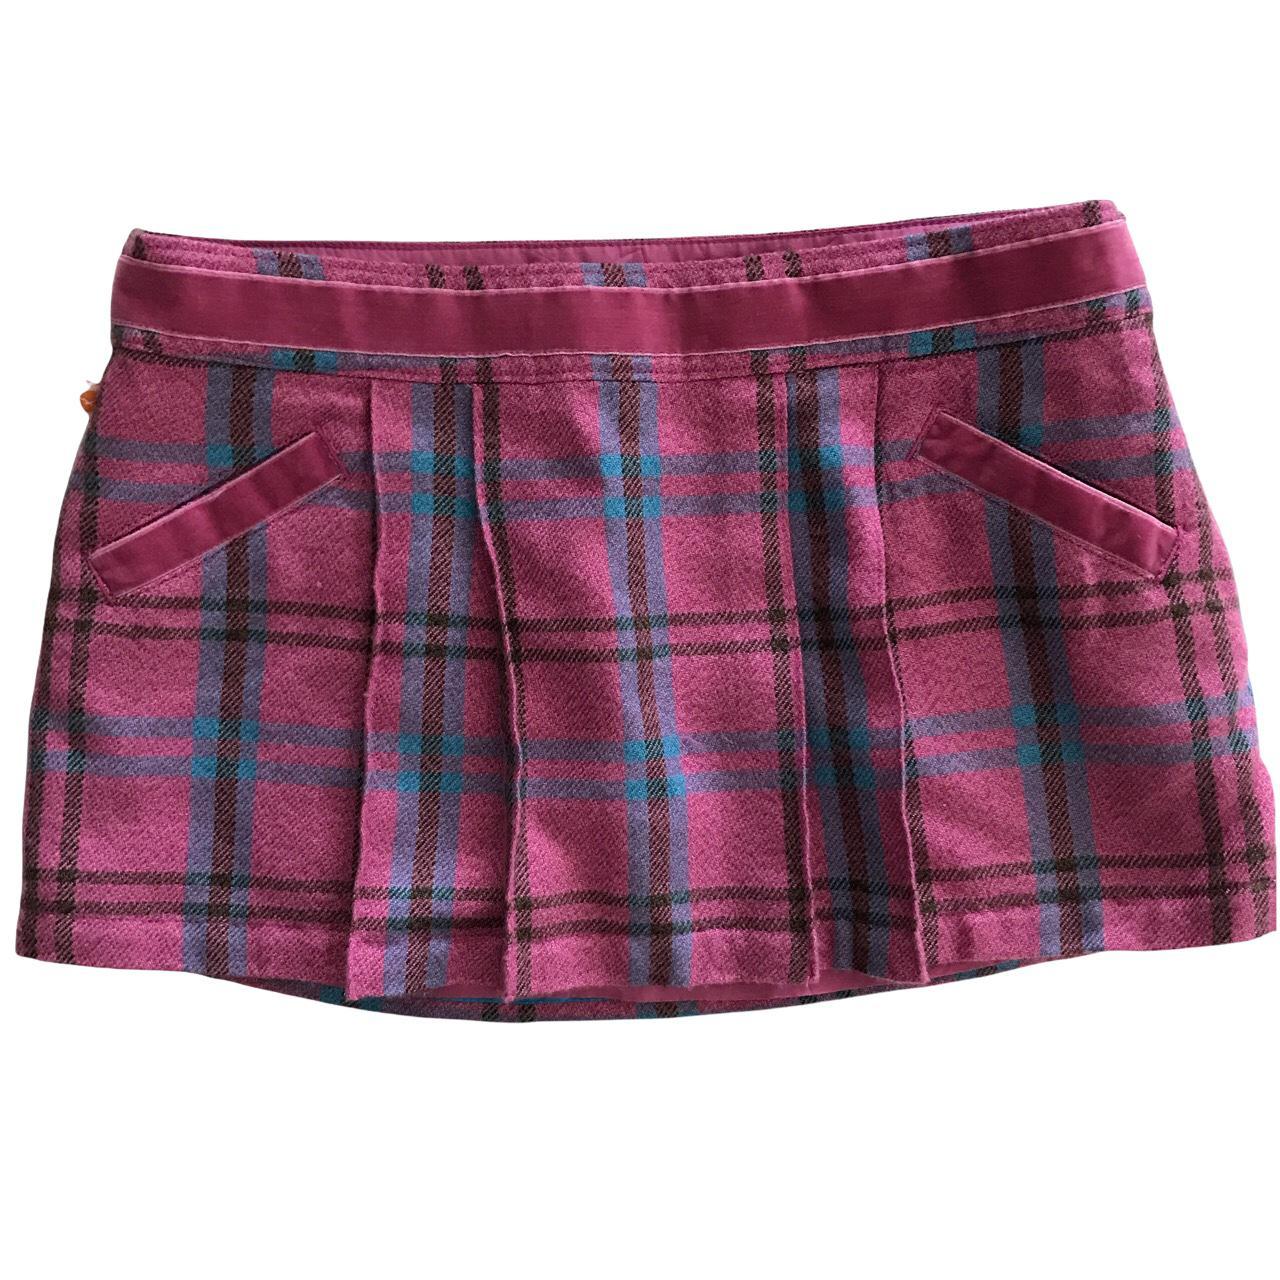 Abercrombie & Fitch Women's Pink and Blue Skirt (2)